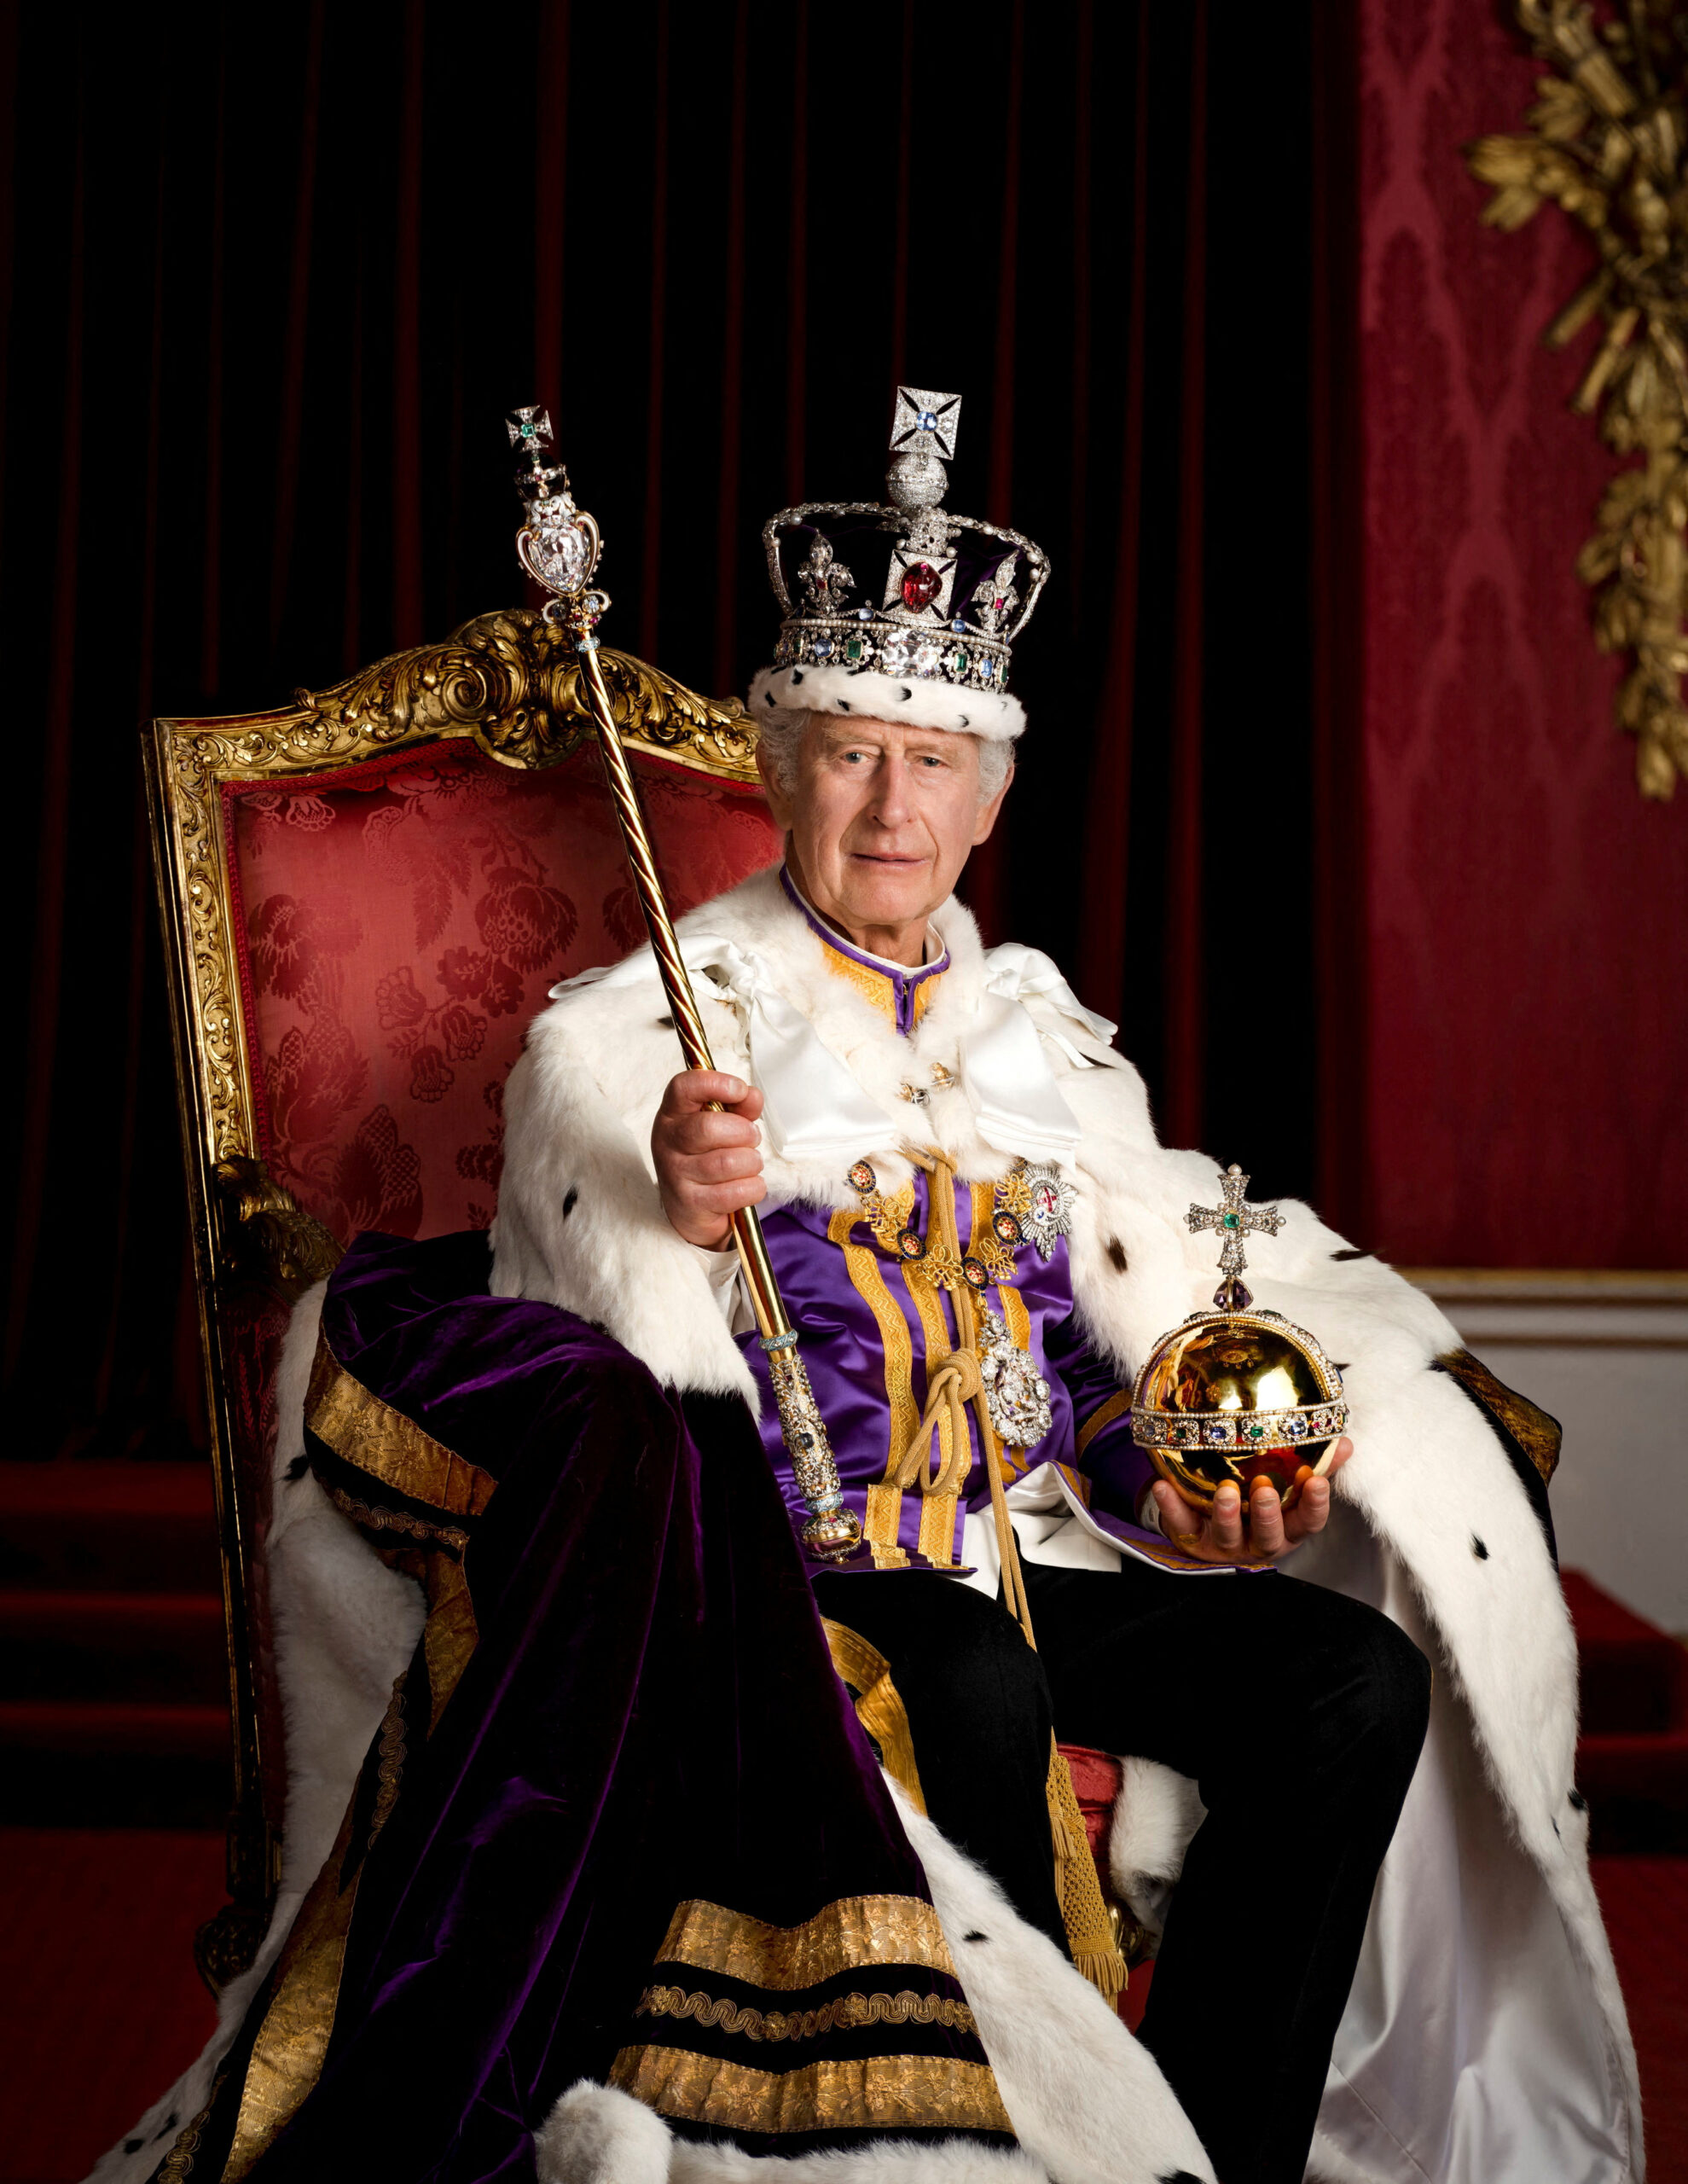 The official Australian site for King